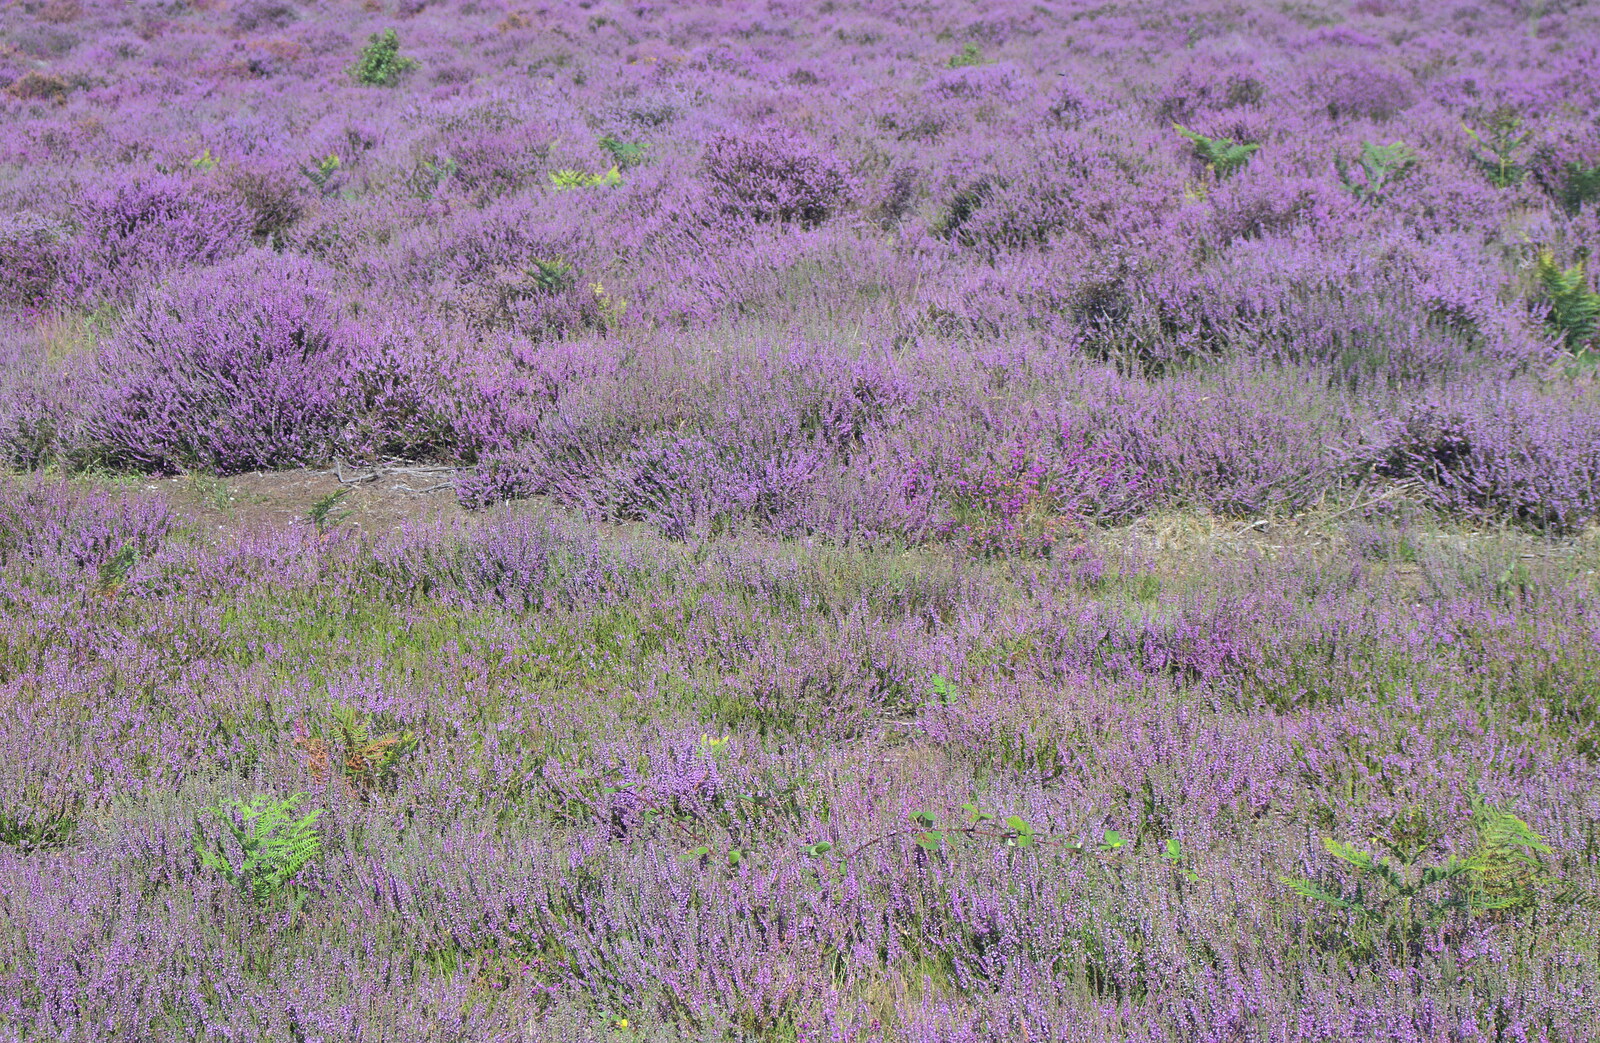 An almost complete carpet of purple heather from Camping by the Seaside, Cliff House, Dunwich, Suffolk - 15th August 2012